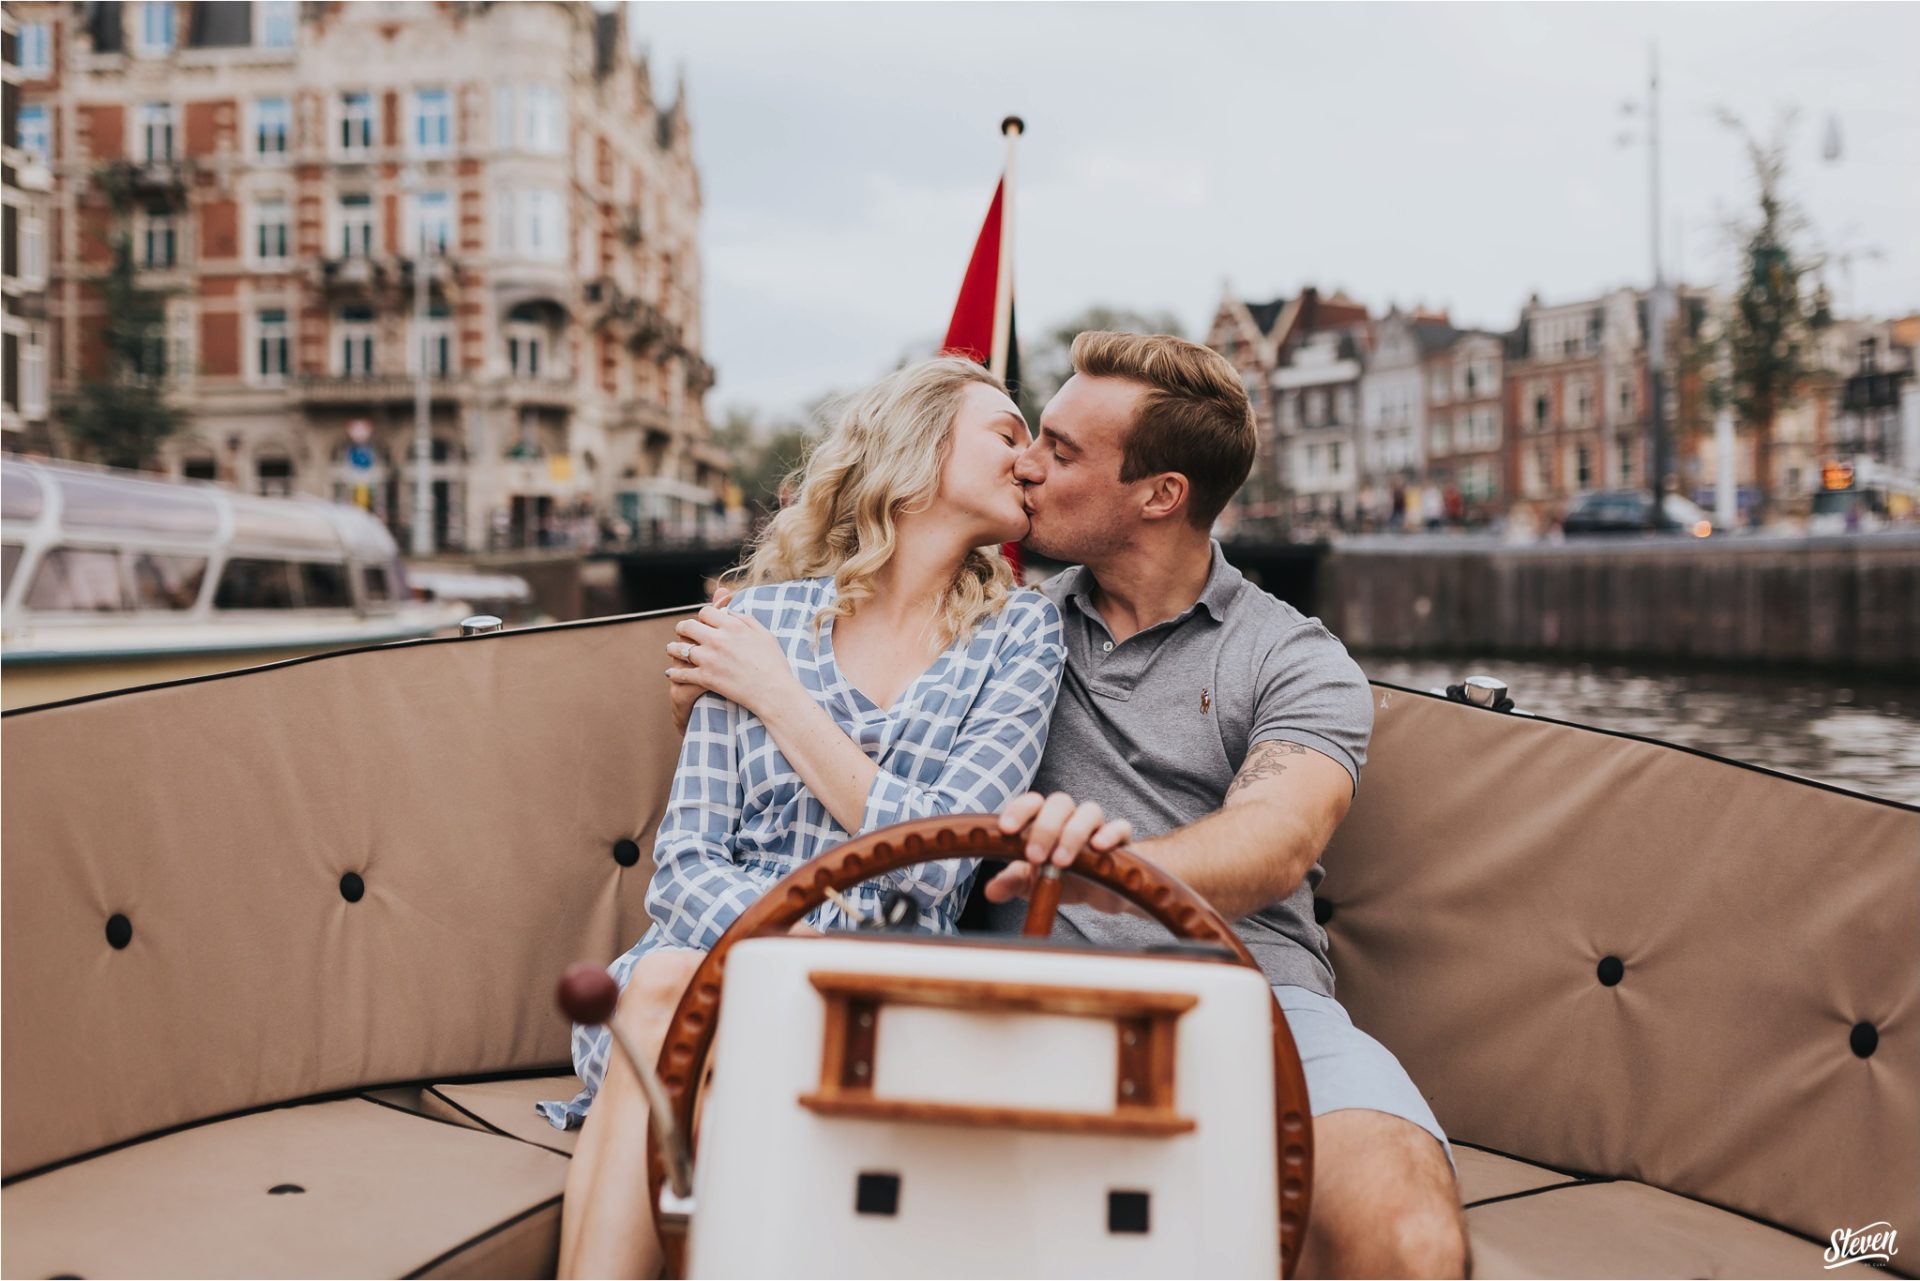 2017-09-20_0017-1920x1281 Canals of Amsterdam Engagement: Yllena and Stas Engagement 